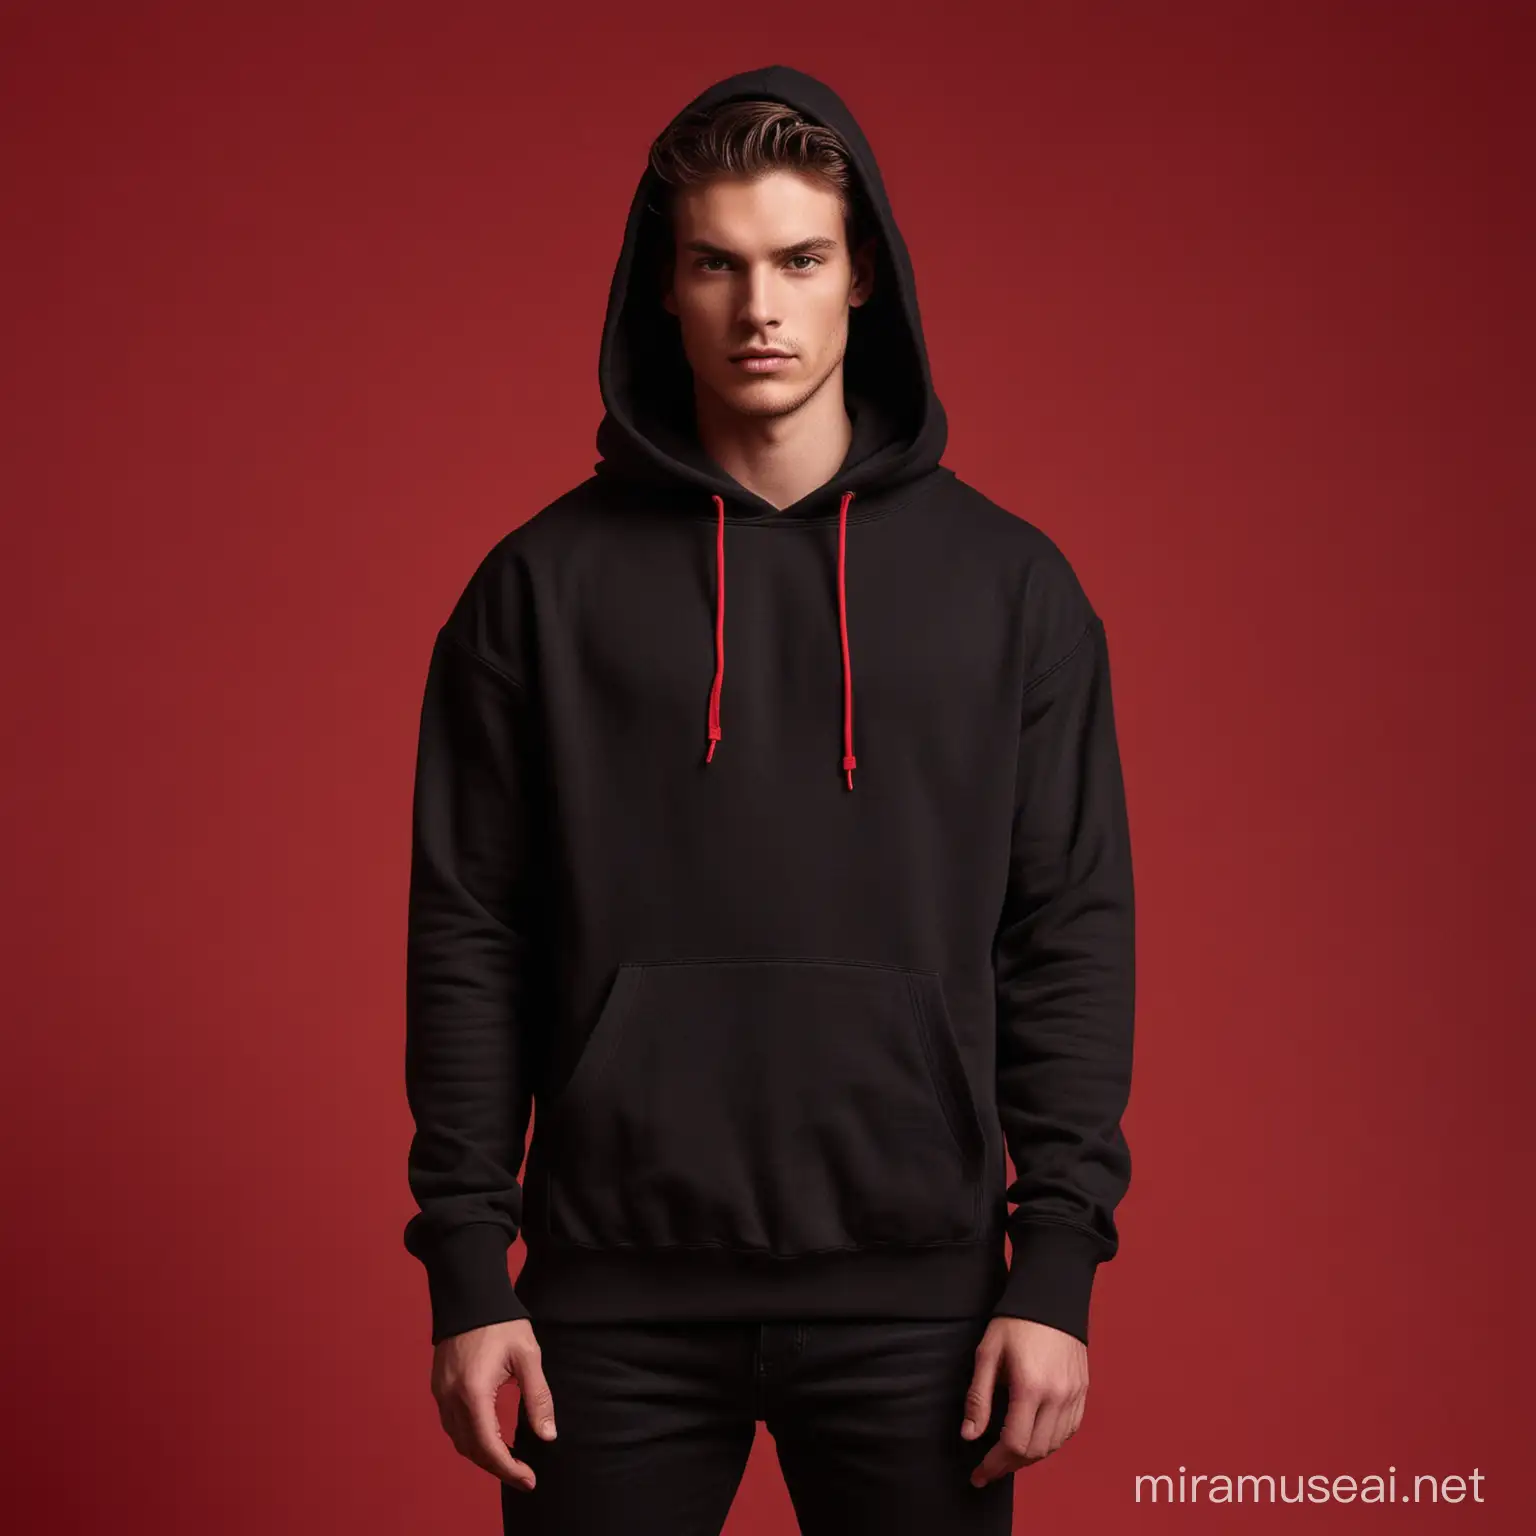 Create me a male model wearing an unprinted black hoodie with no neckband, red color background. Show the model's entire body